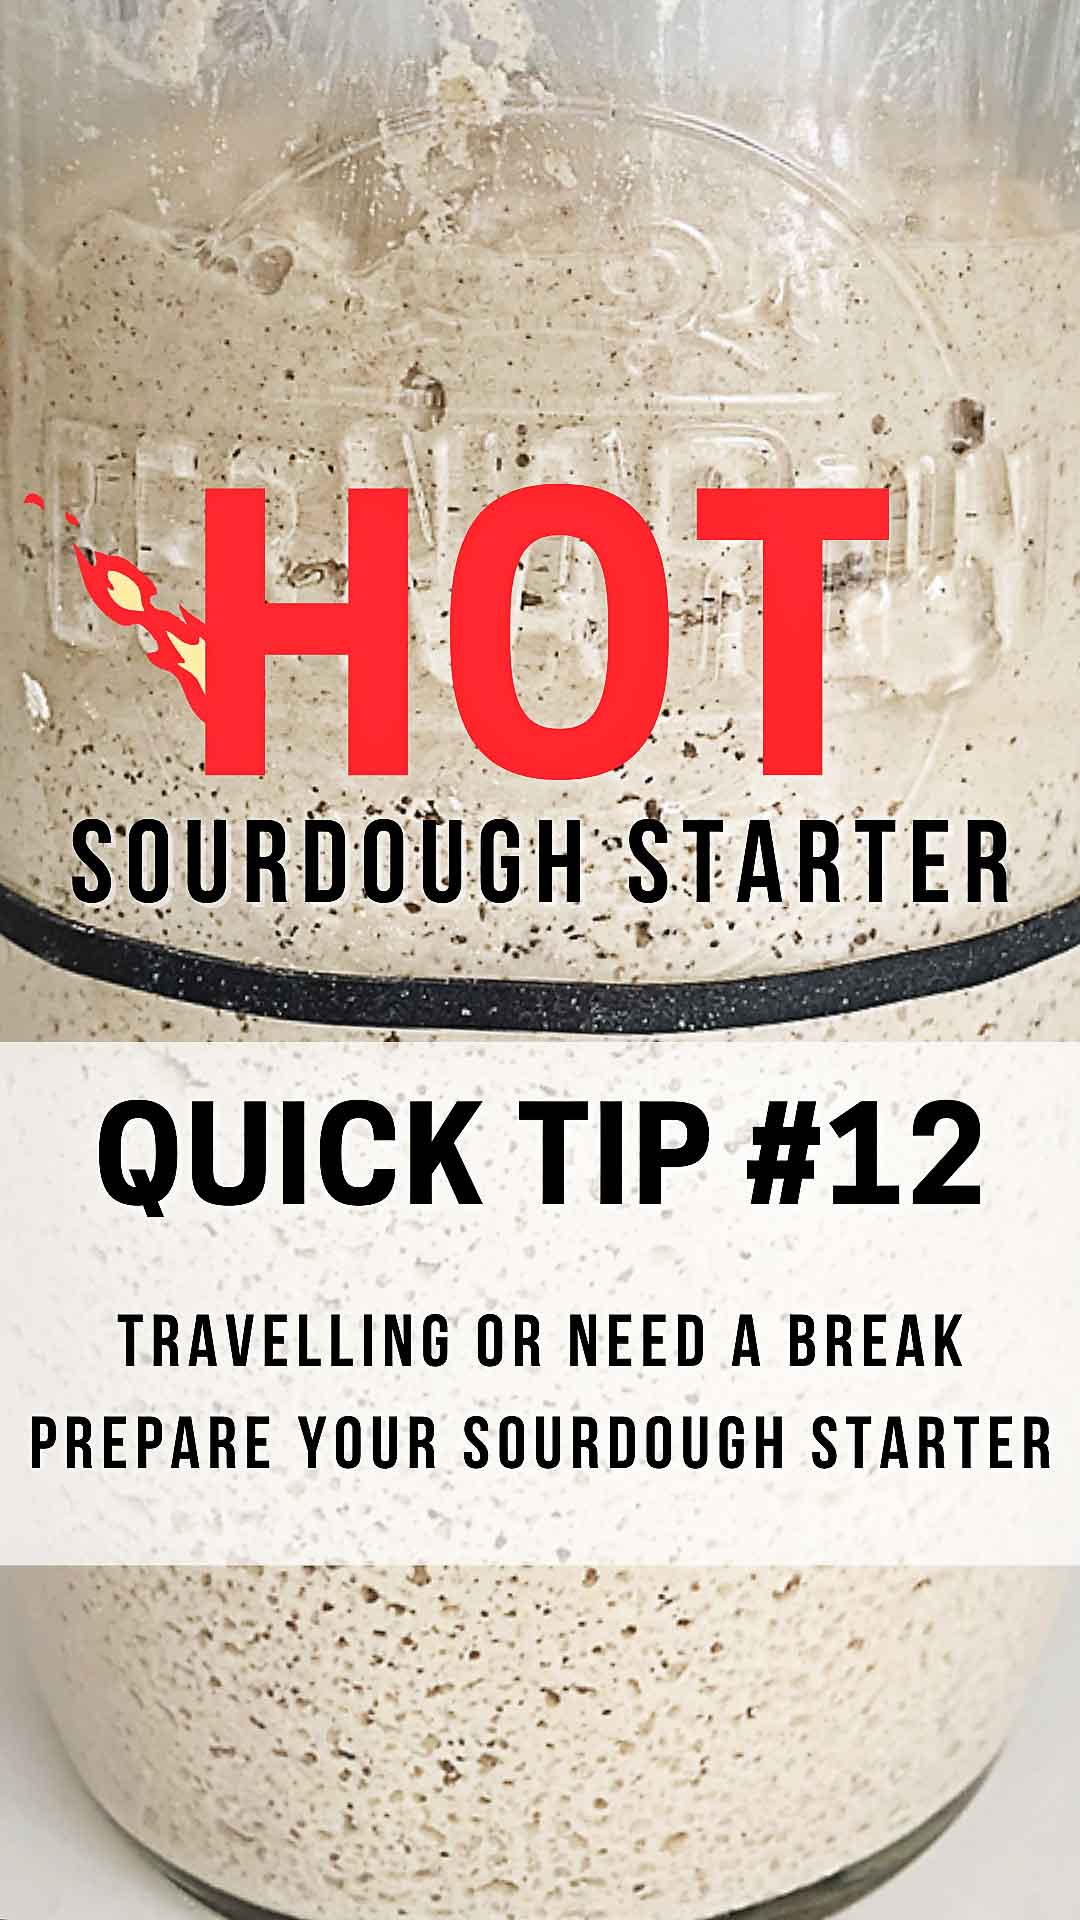 Going on vacation? Need a break from caring for your sourdough starter? In this quick tip learn how to prepare your sourdough starter for a period of inactivity or dormancy while you are away! sourdough starter tips